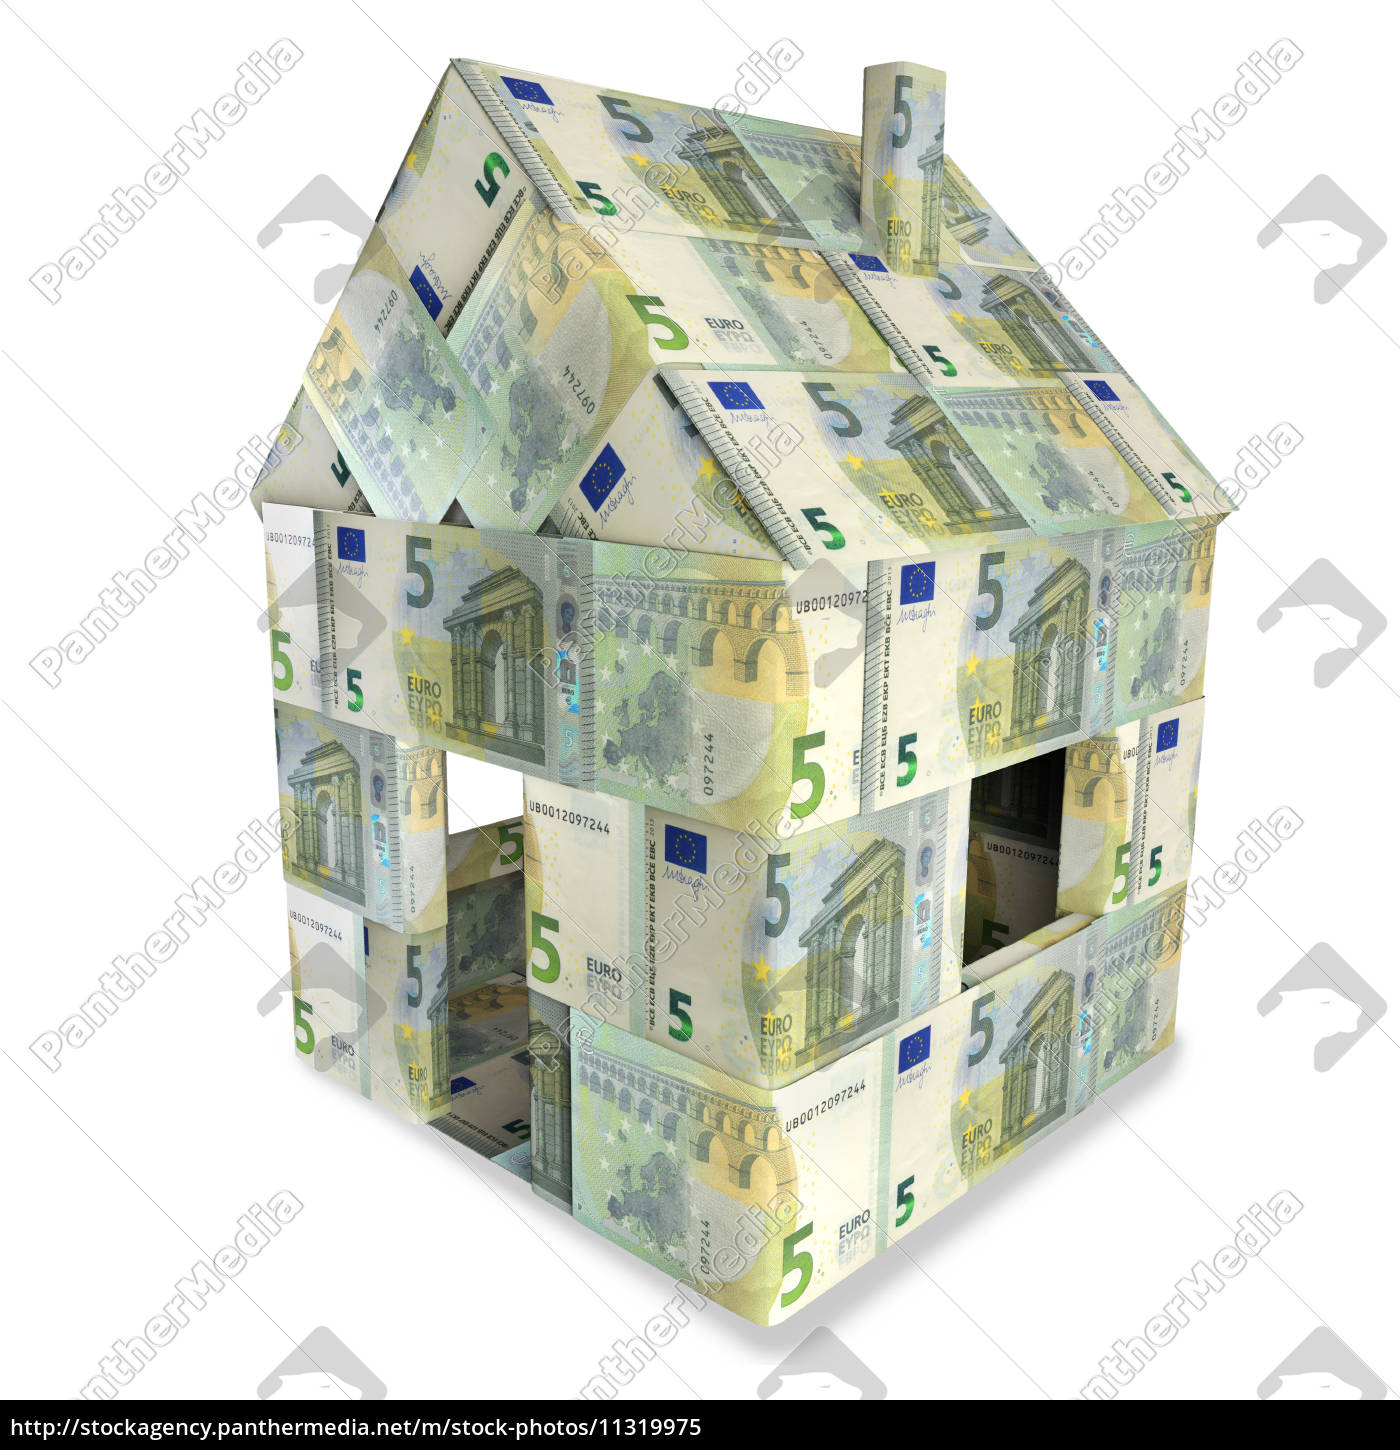 House of 5 euro notes and small money - Royalty free image #11319975